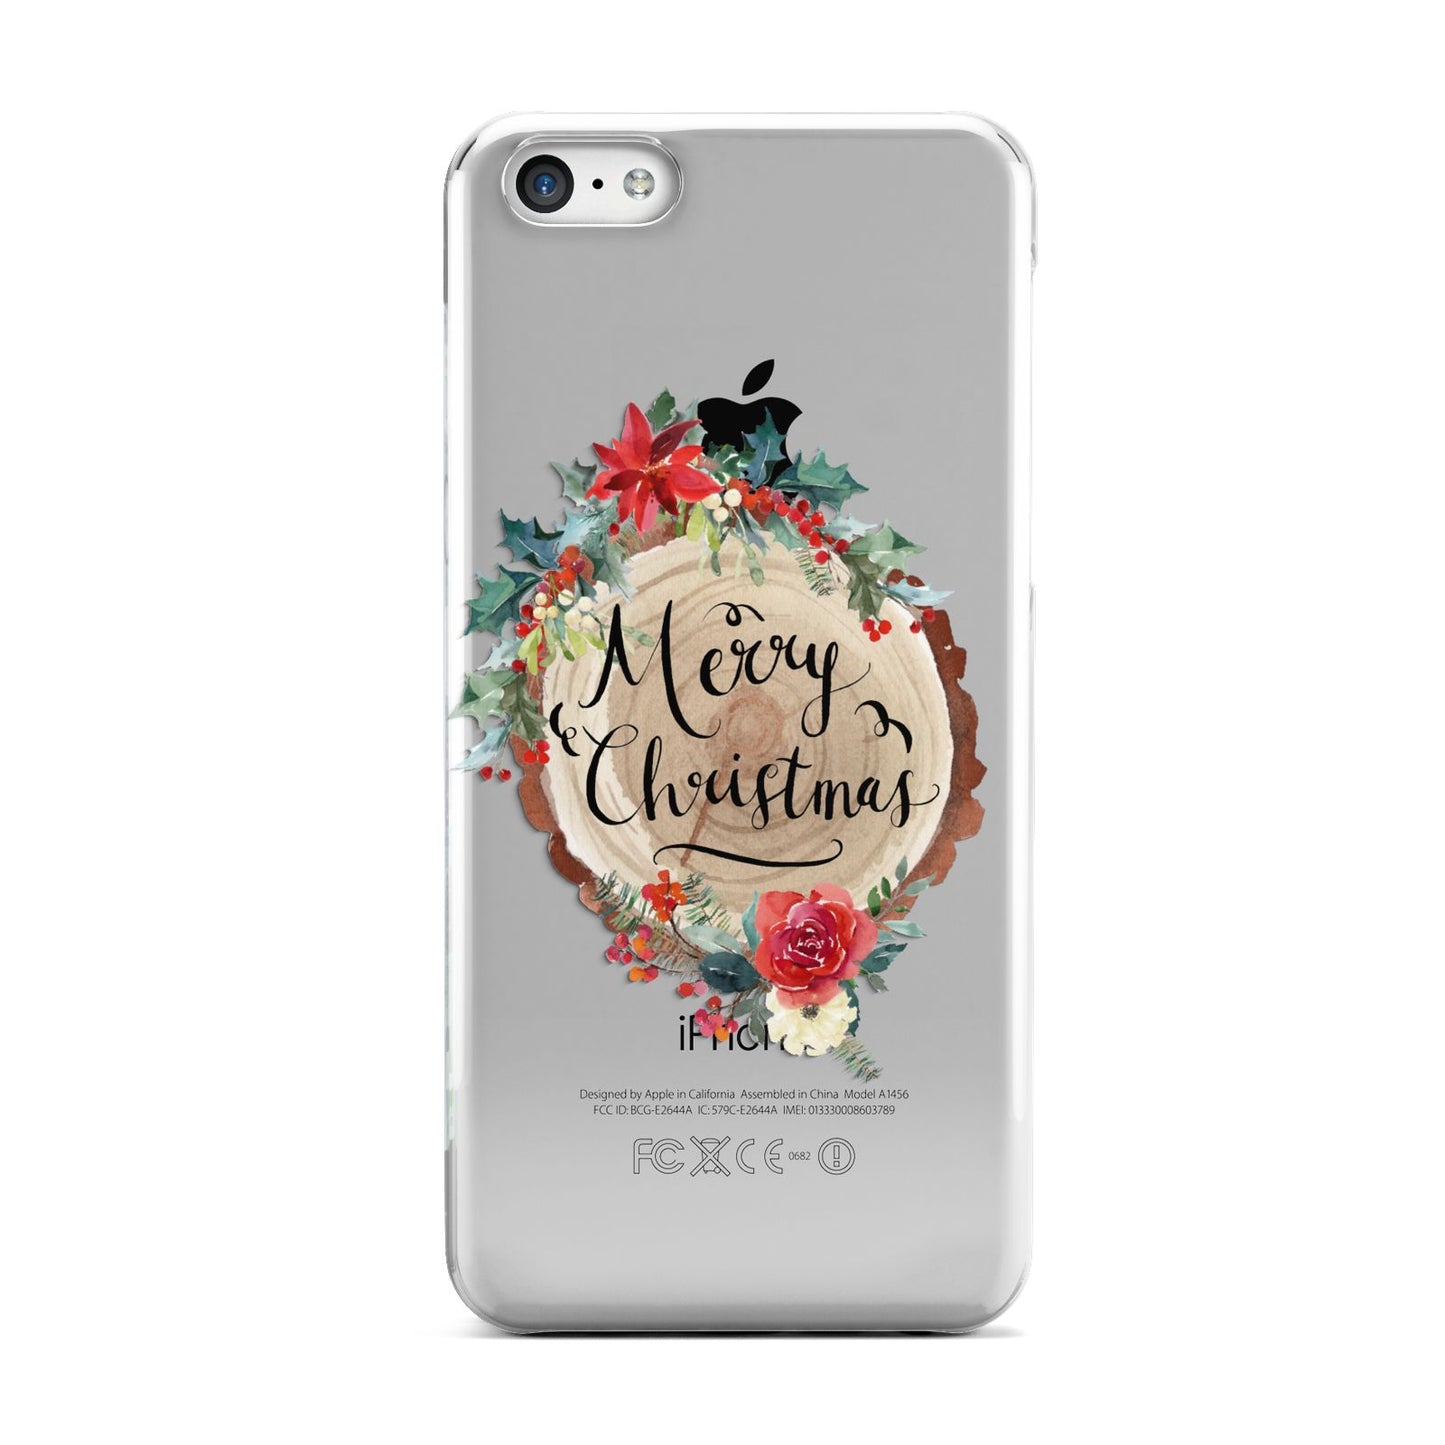 Merry Christmas Log Floral Apple iPhone 5c Case